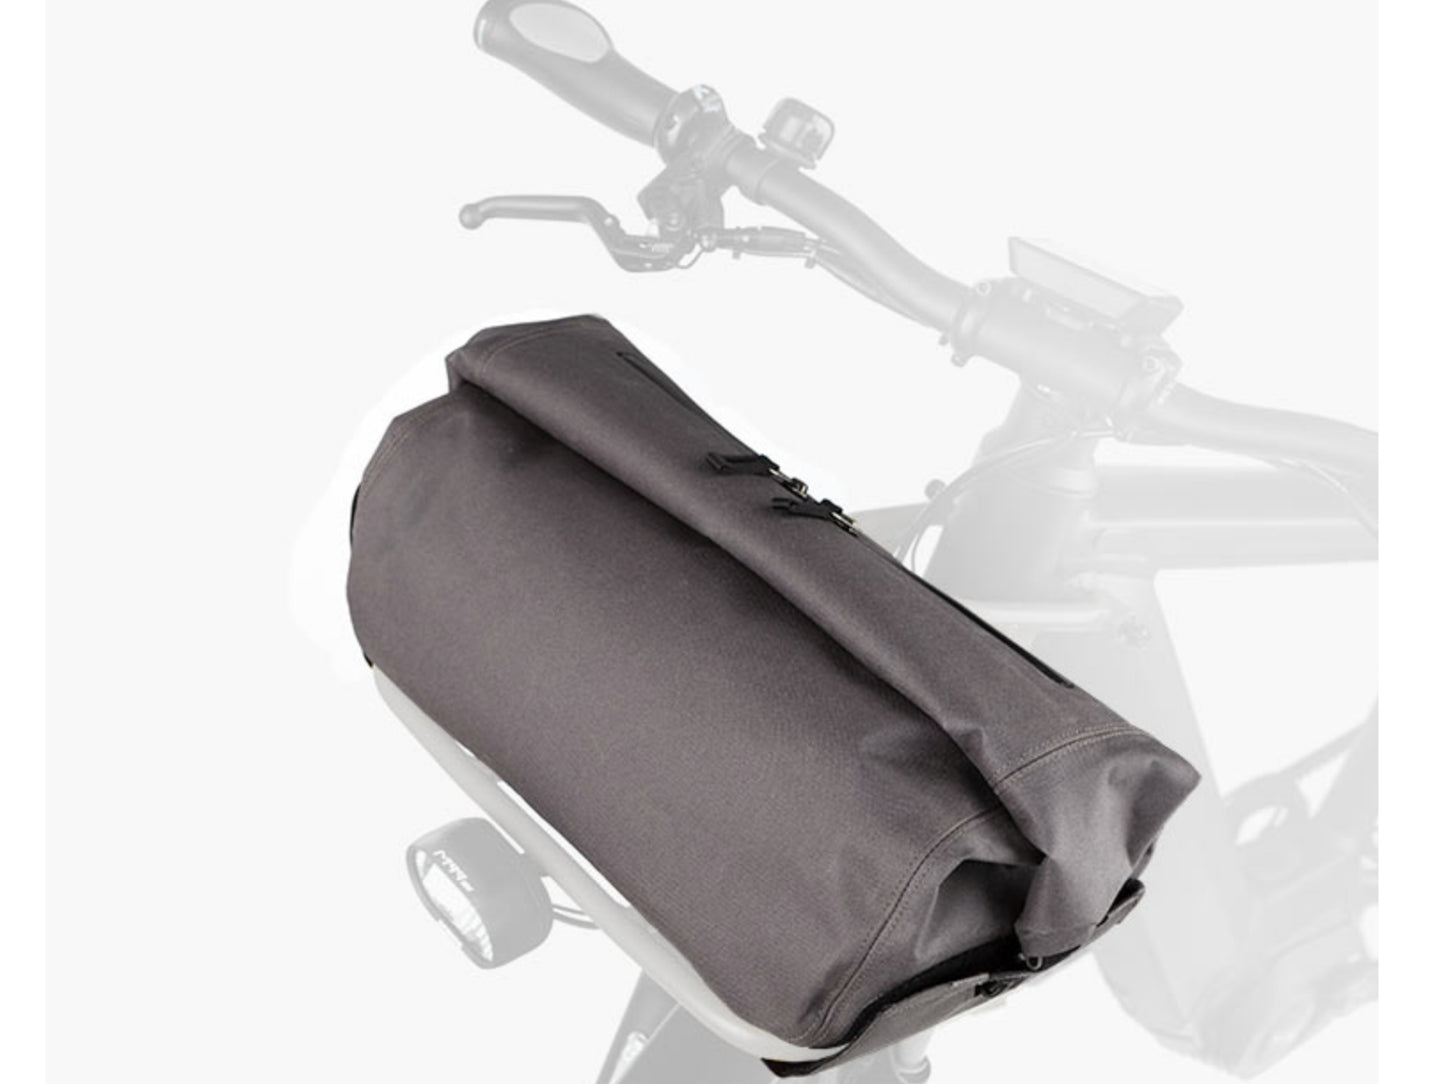 Riese and Muller Supercharger GT Rohloff emtb hardtail close up front carrier bag option